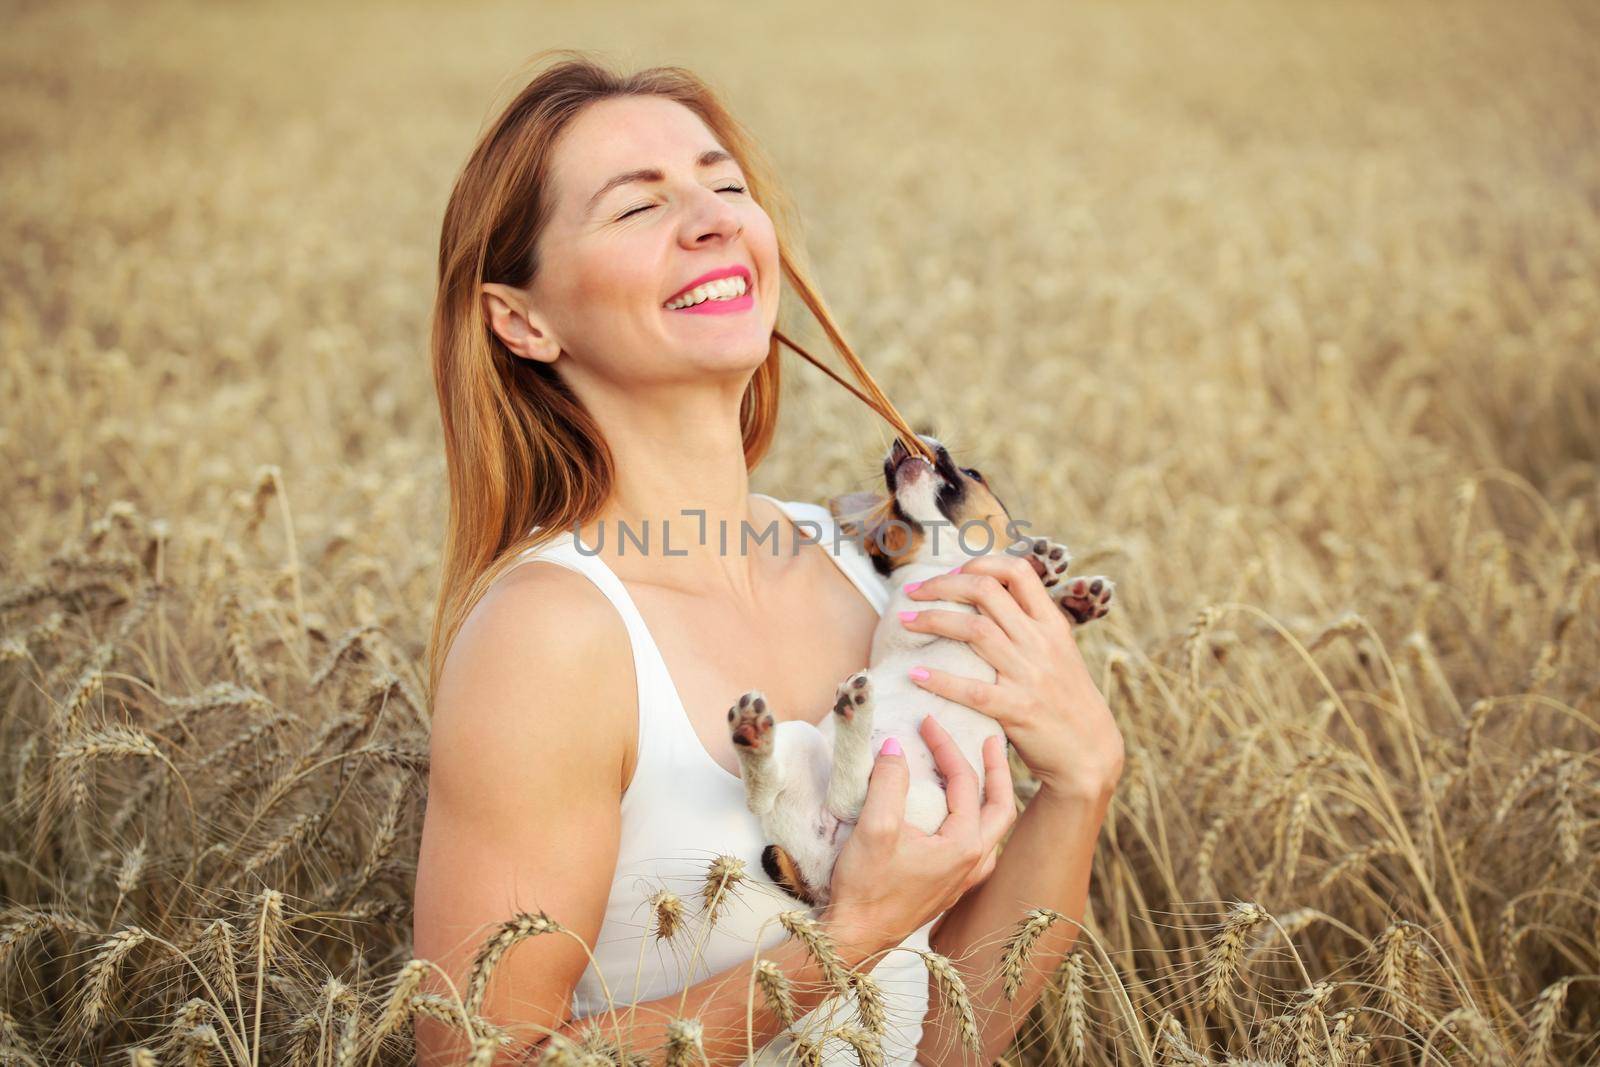 Woman with Jack Russell terrier puppy on her hands, wheat field in background, dog is restless and chewing the hair instead of posing. by Ivanko